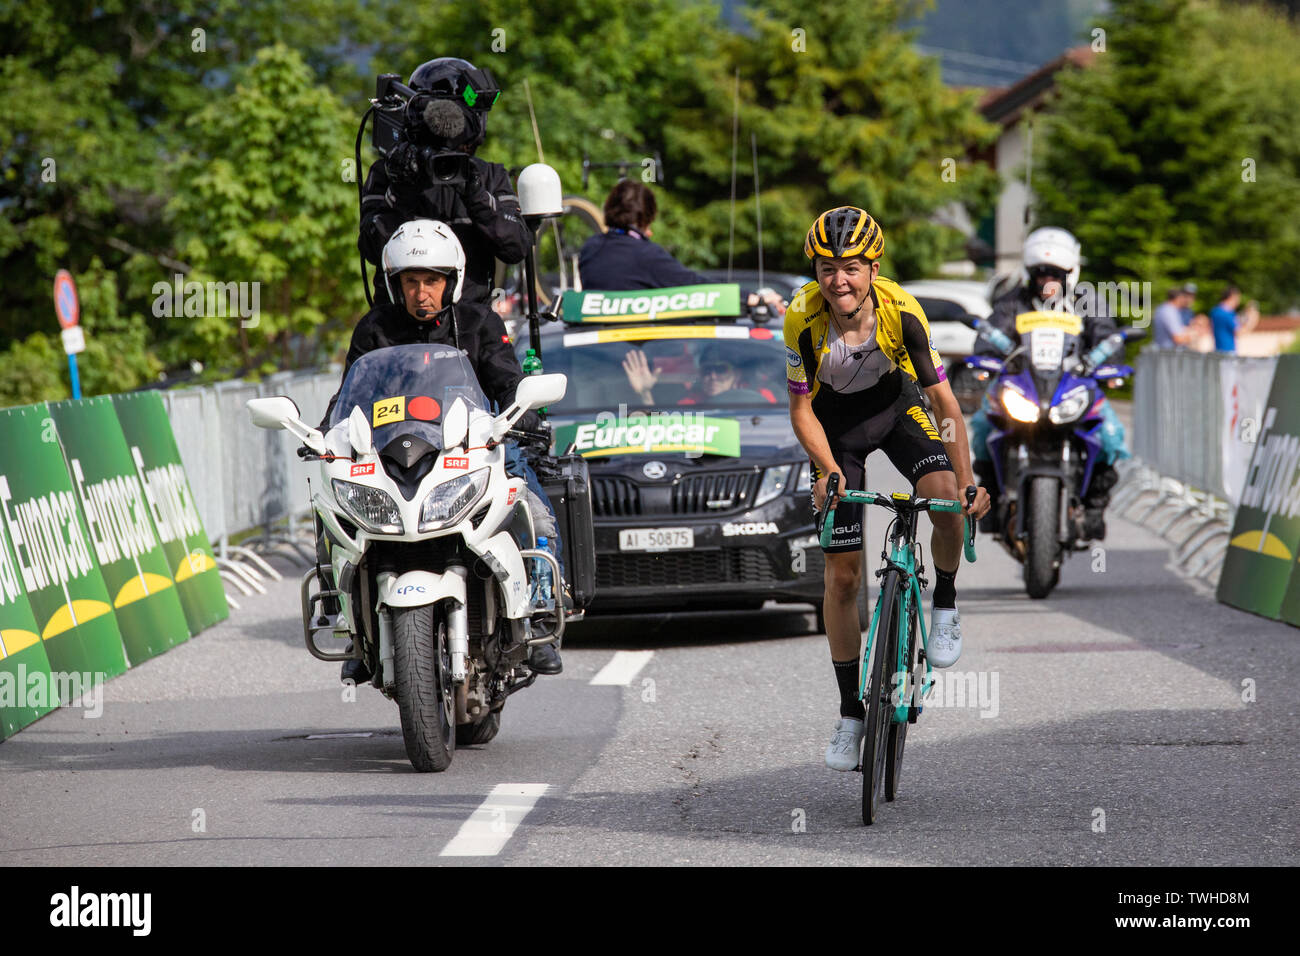 20.6.2019 - Etappe 6 of the Tour de Suisse, 300 meters before the finish line in the Flumserberg in Flums, Switzerland, Antwan Tolhoek finishes first. Stock Photo